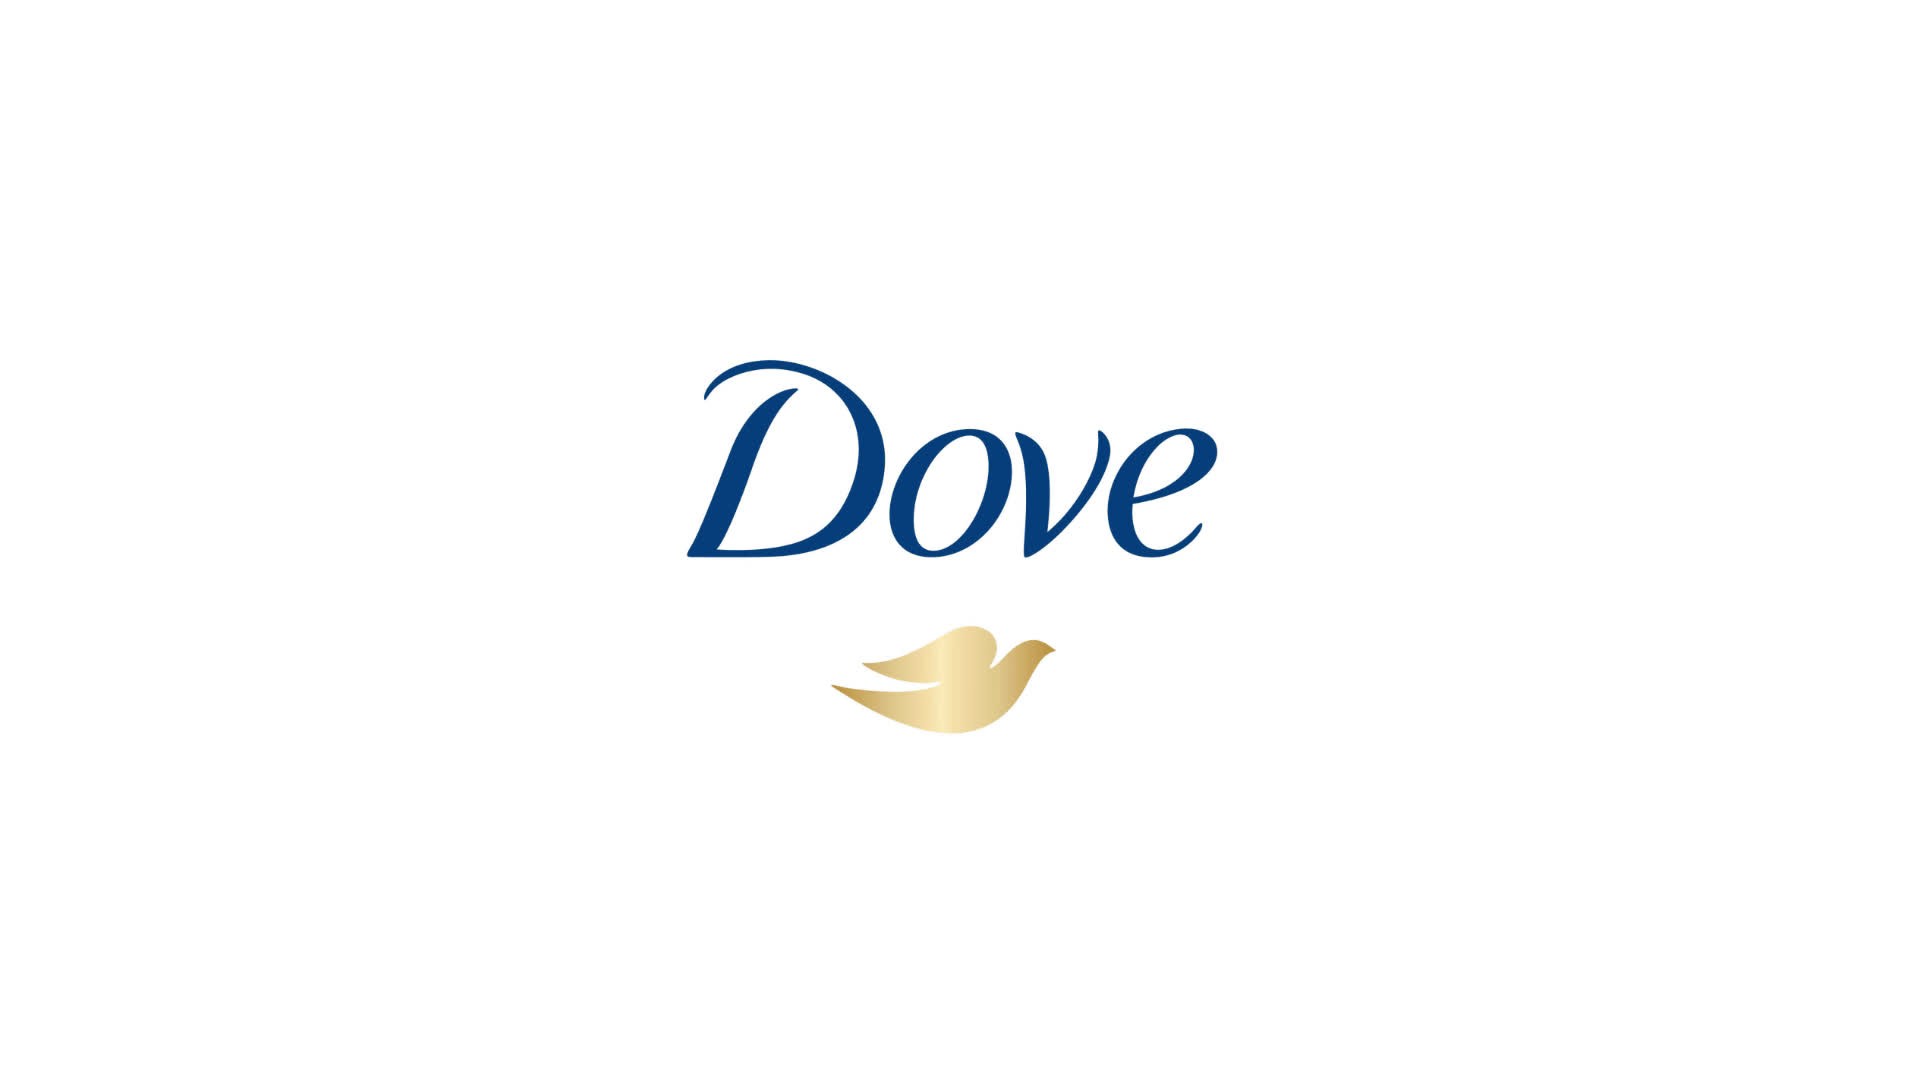 Dove - Love Your Hair